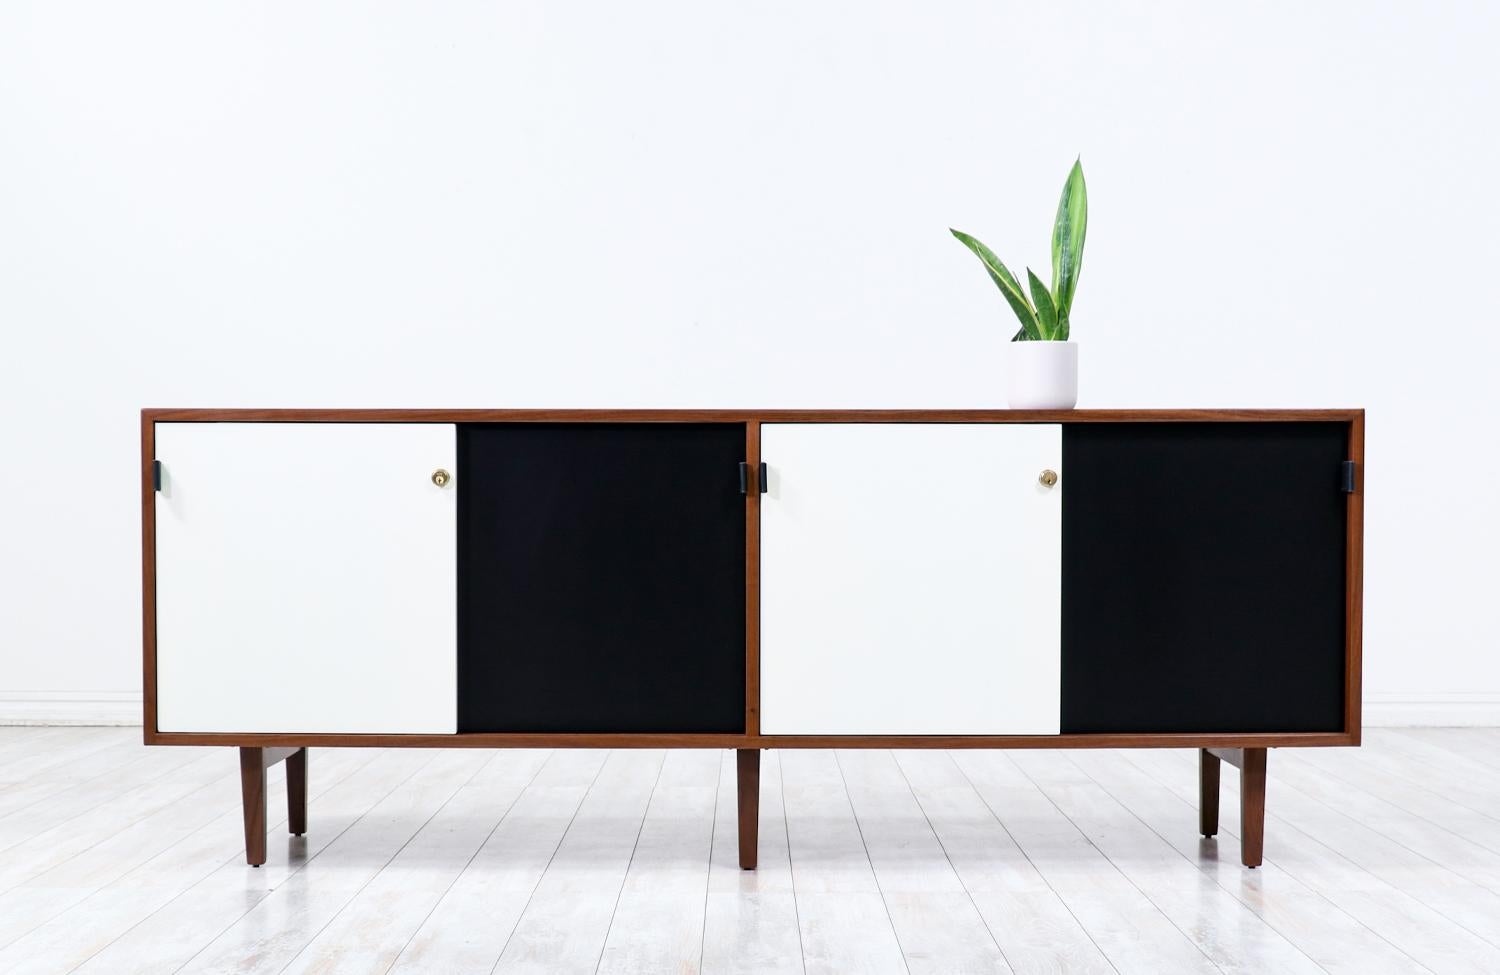 Elegant credenza designed by architect and designer Florence Knoll and manufactured by Knoll Associates Inc, circa 1950s. This iconic design features a walnut wood case over six solid walnut legs. Four offset black and white lacquered sliding doors,